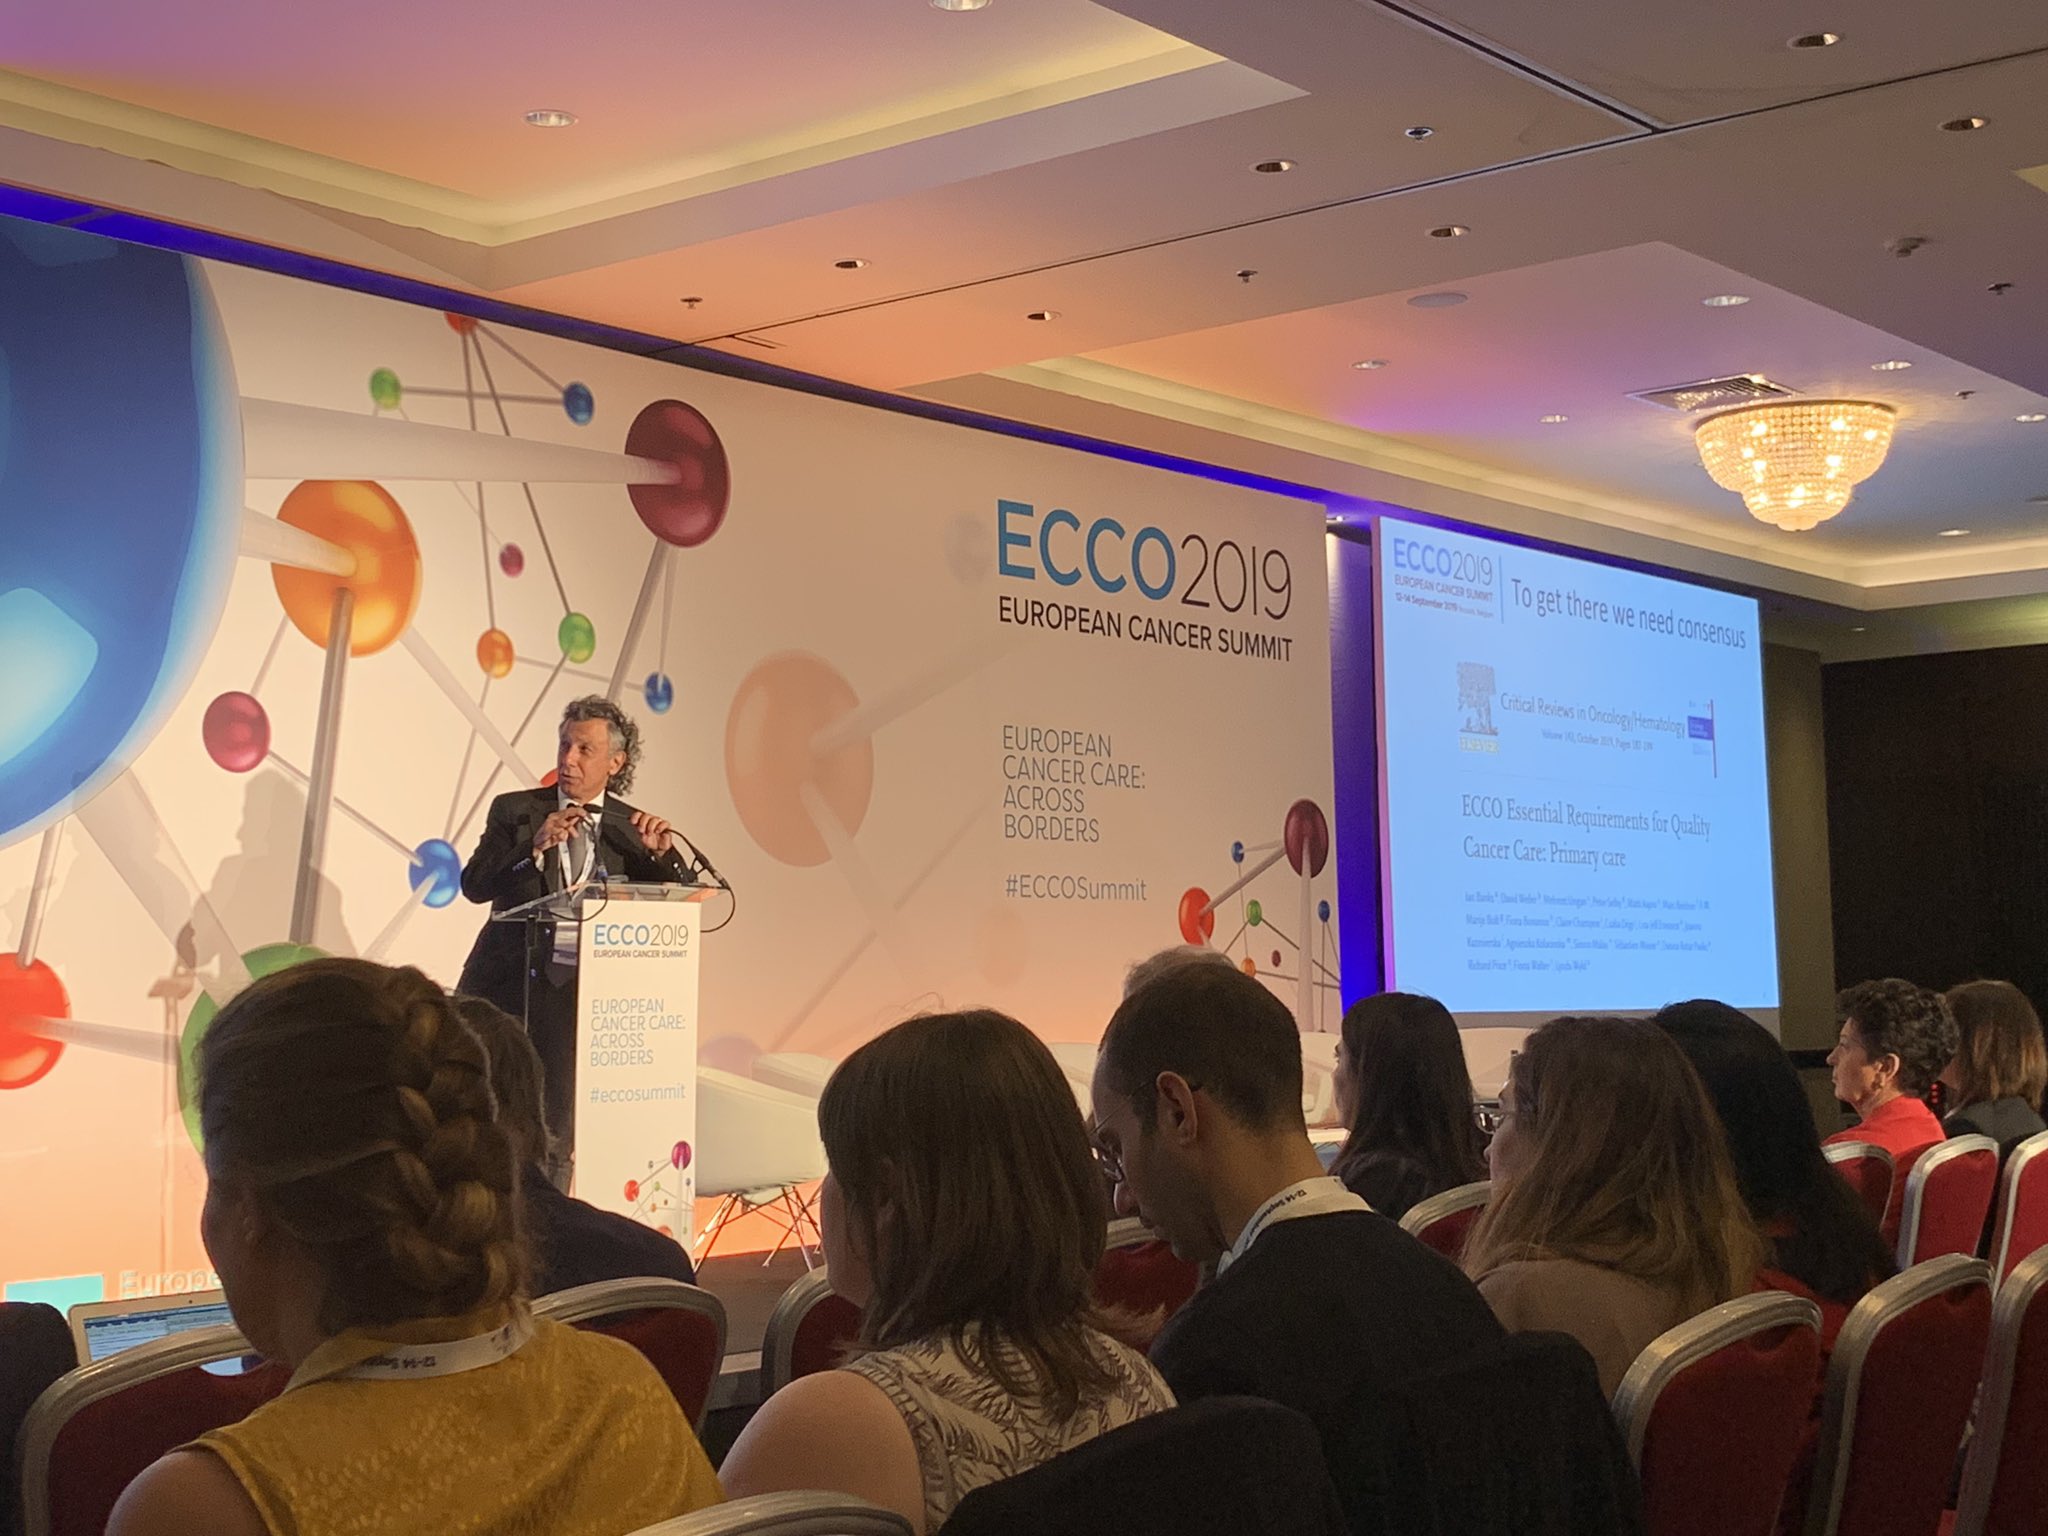 European Cancer Organisation on Twitter: "Prof @MehmetUngan @WoncaEurope announces new ECCO Essential Requirements for #QualityCancerCare: #PrimaryCare! https://t.co/zUPIlgJC46 #cancercare #cancerpolicy https://t.co/wlTh3lZAbI" / Twitter